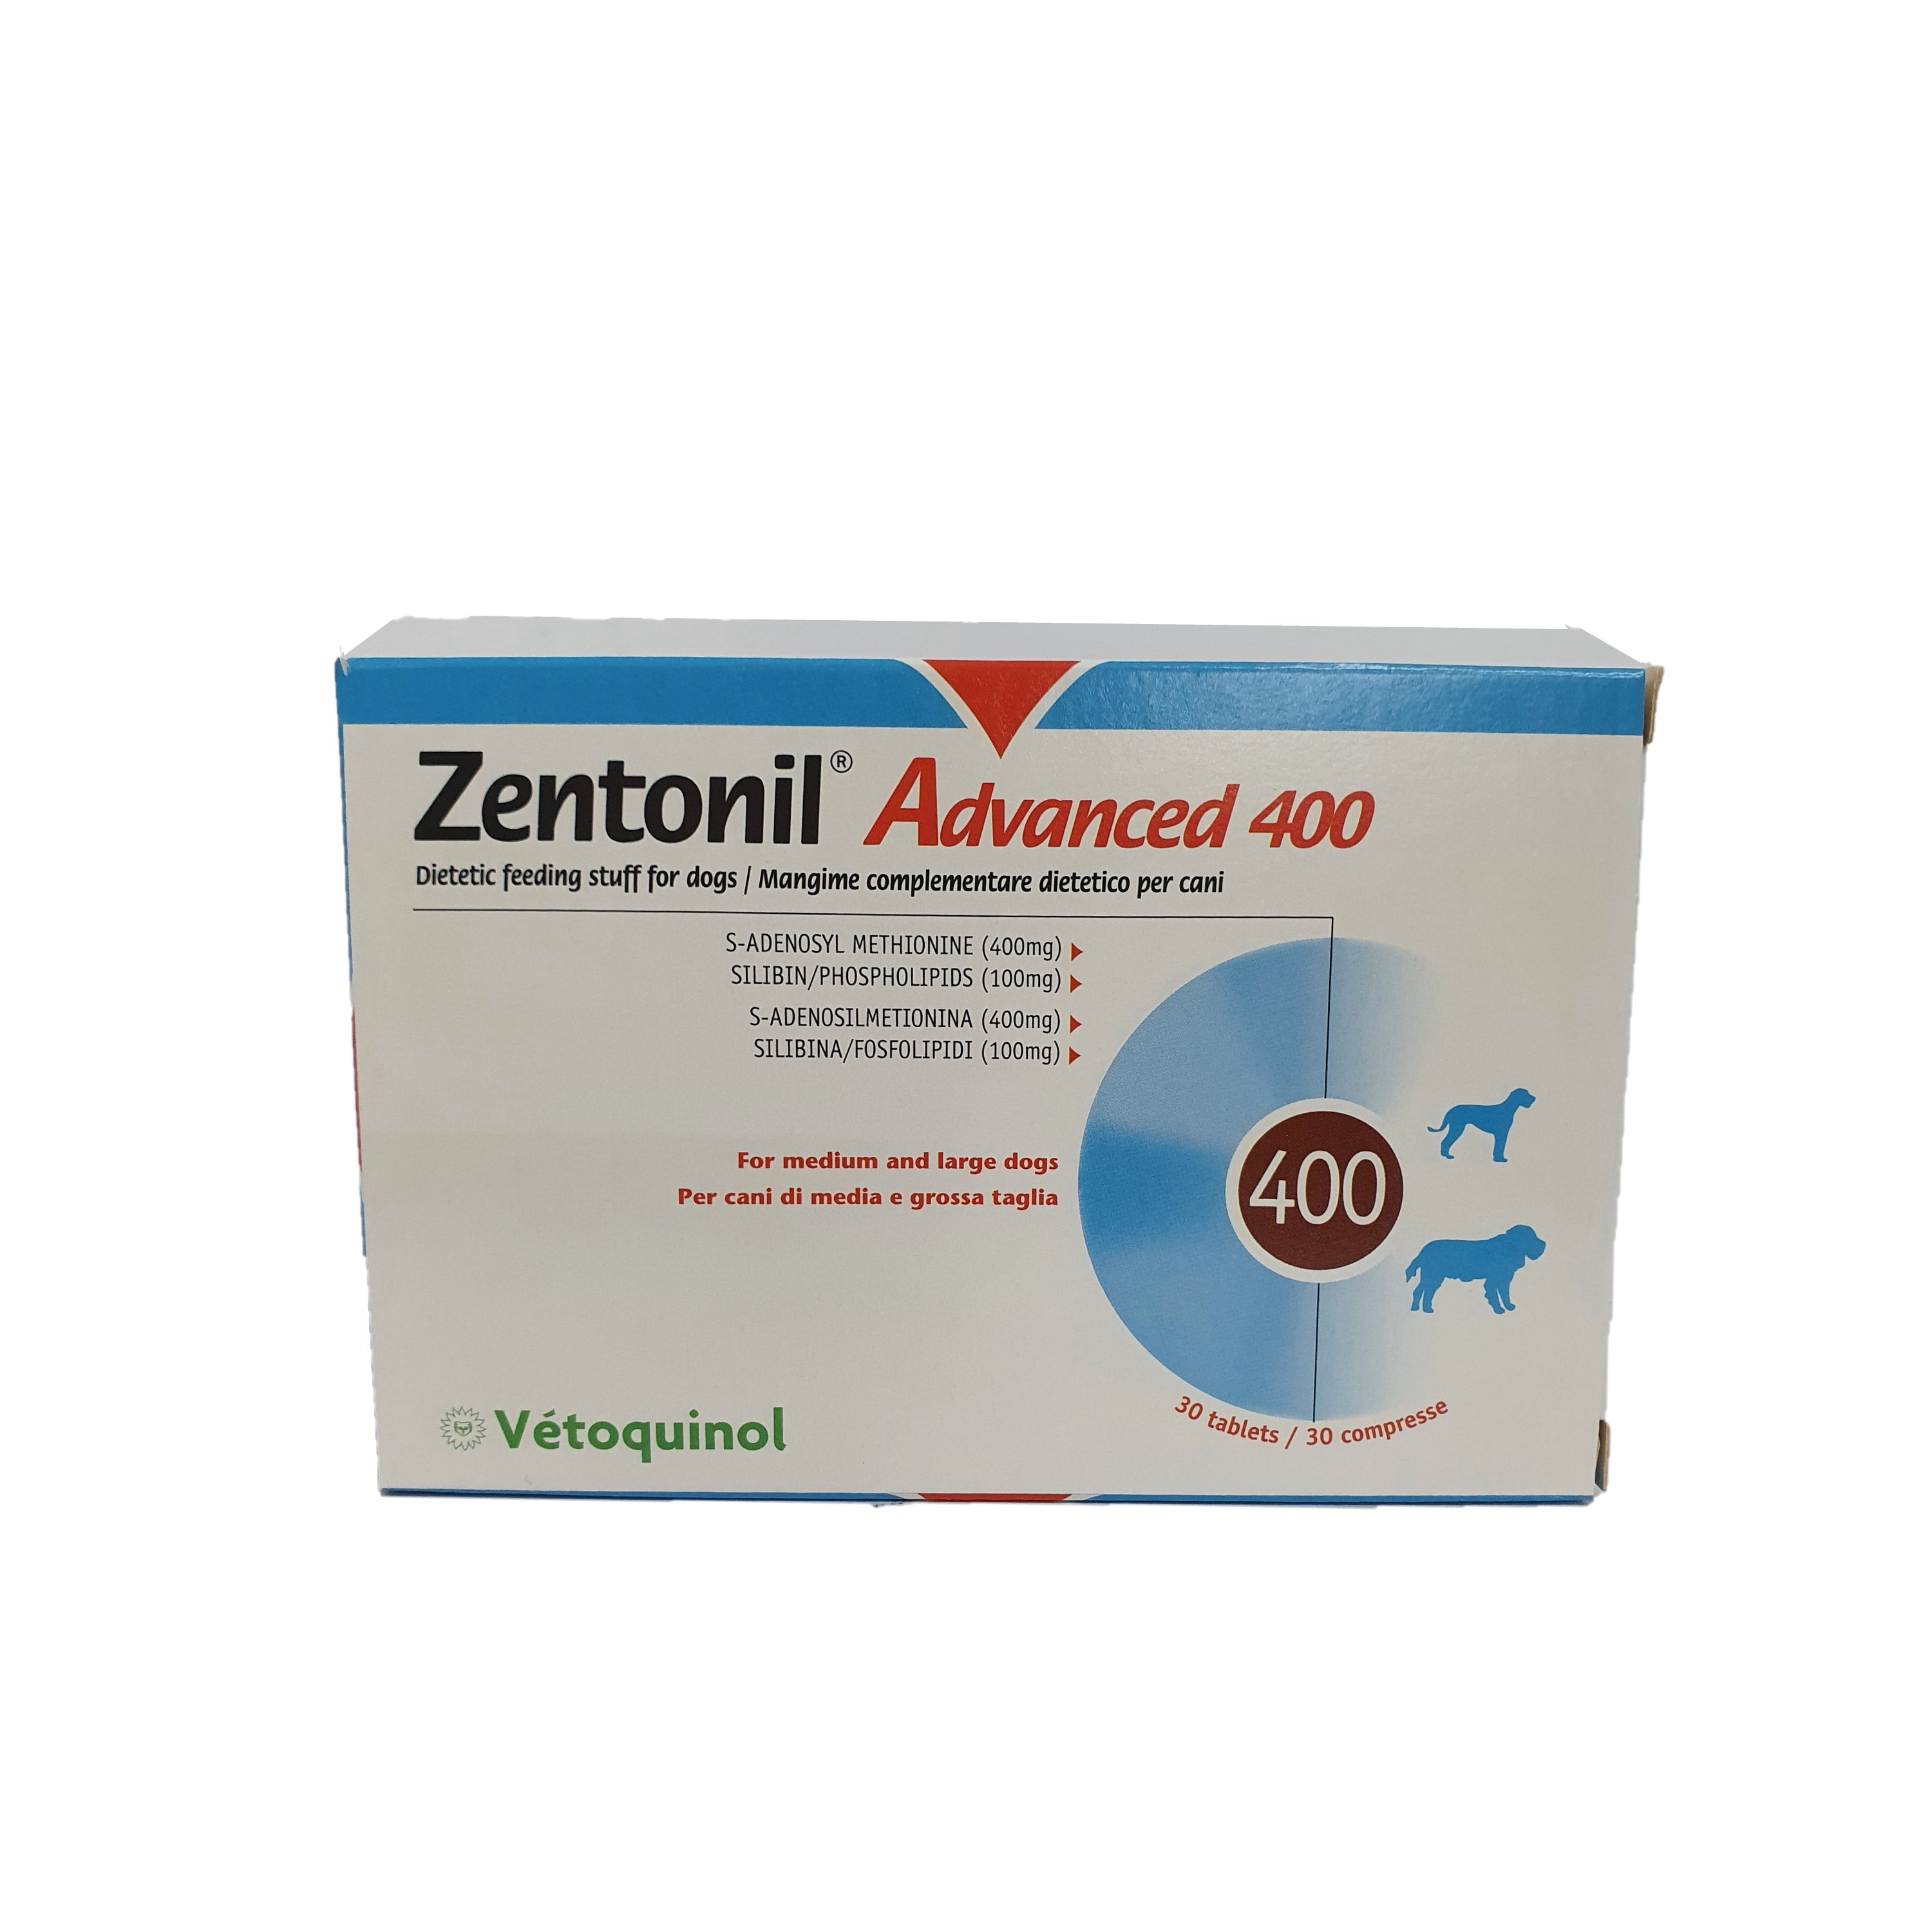 Vetoquinol Zentonil Advanced 400 Liver Function Support for Dogs Cats Pets